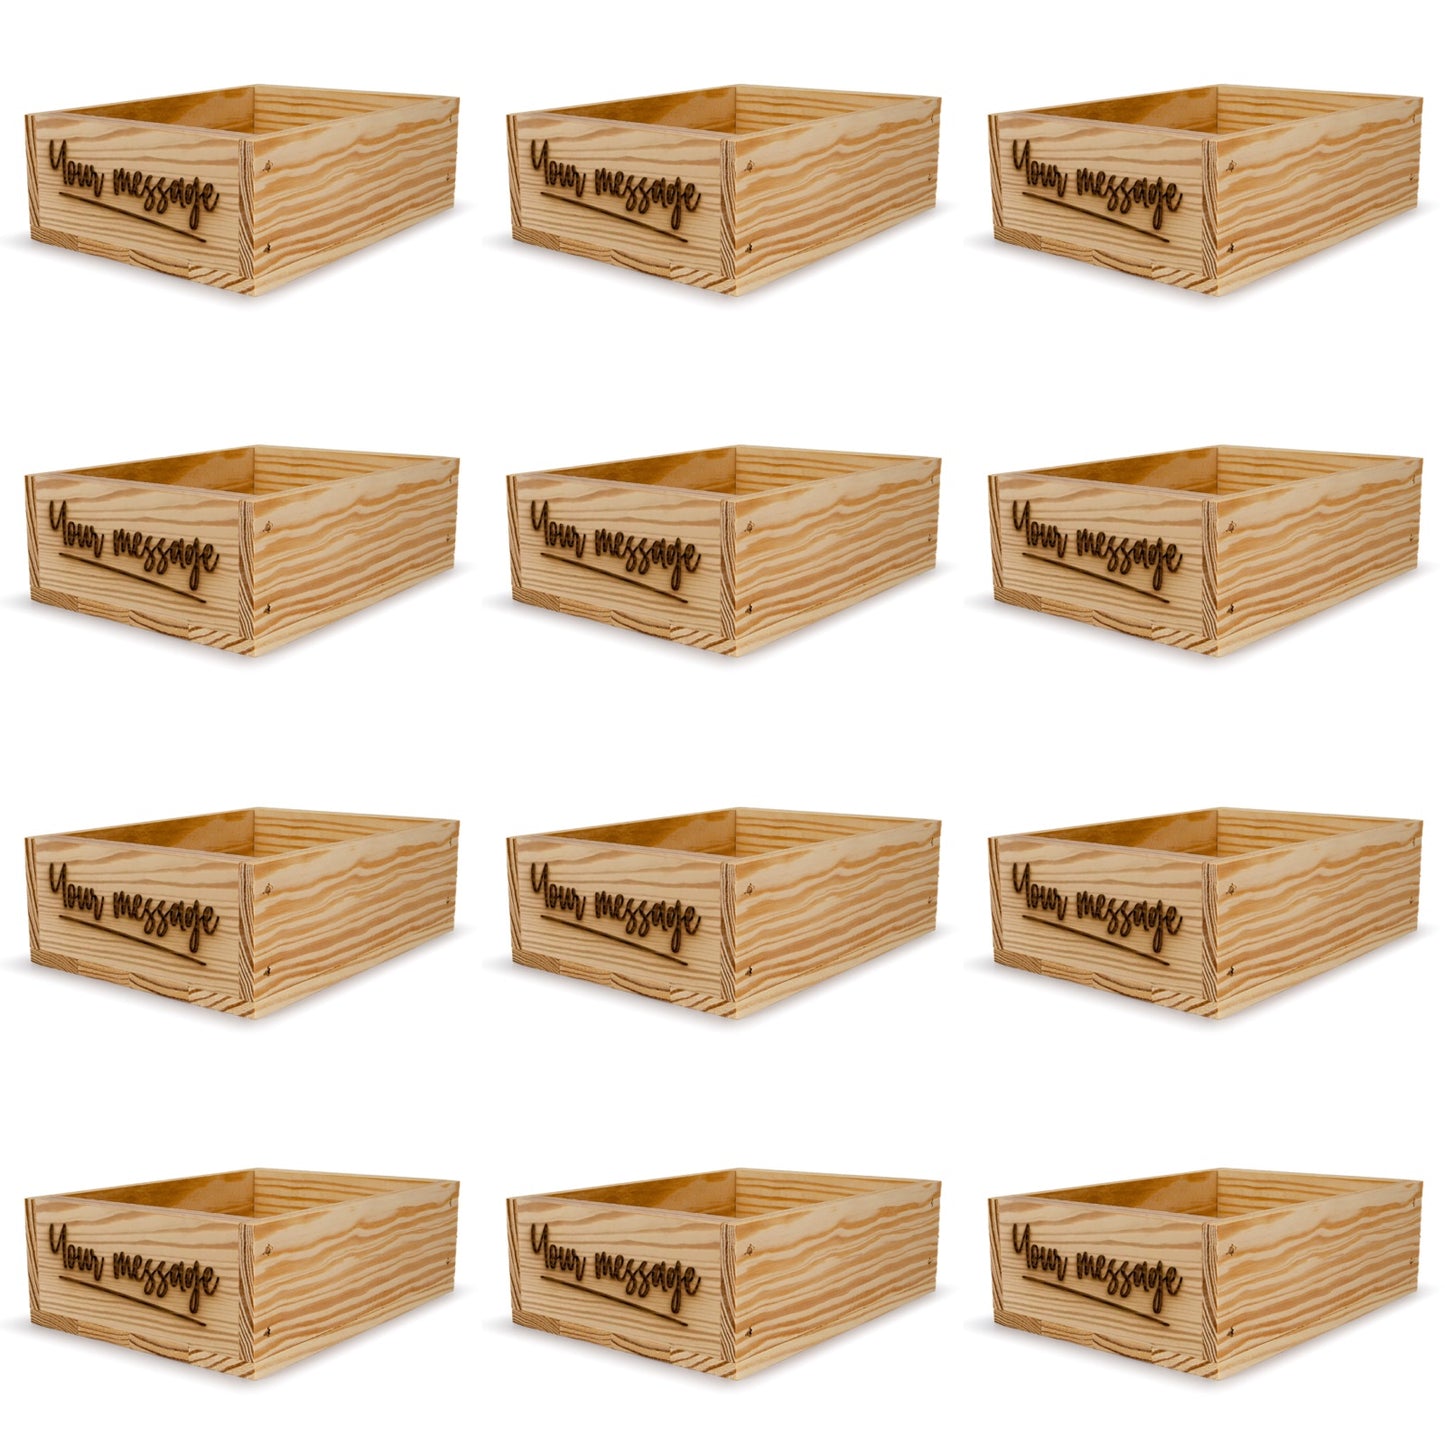 12 Small wooden crates with custom message 8x6.25x2.75